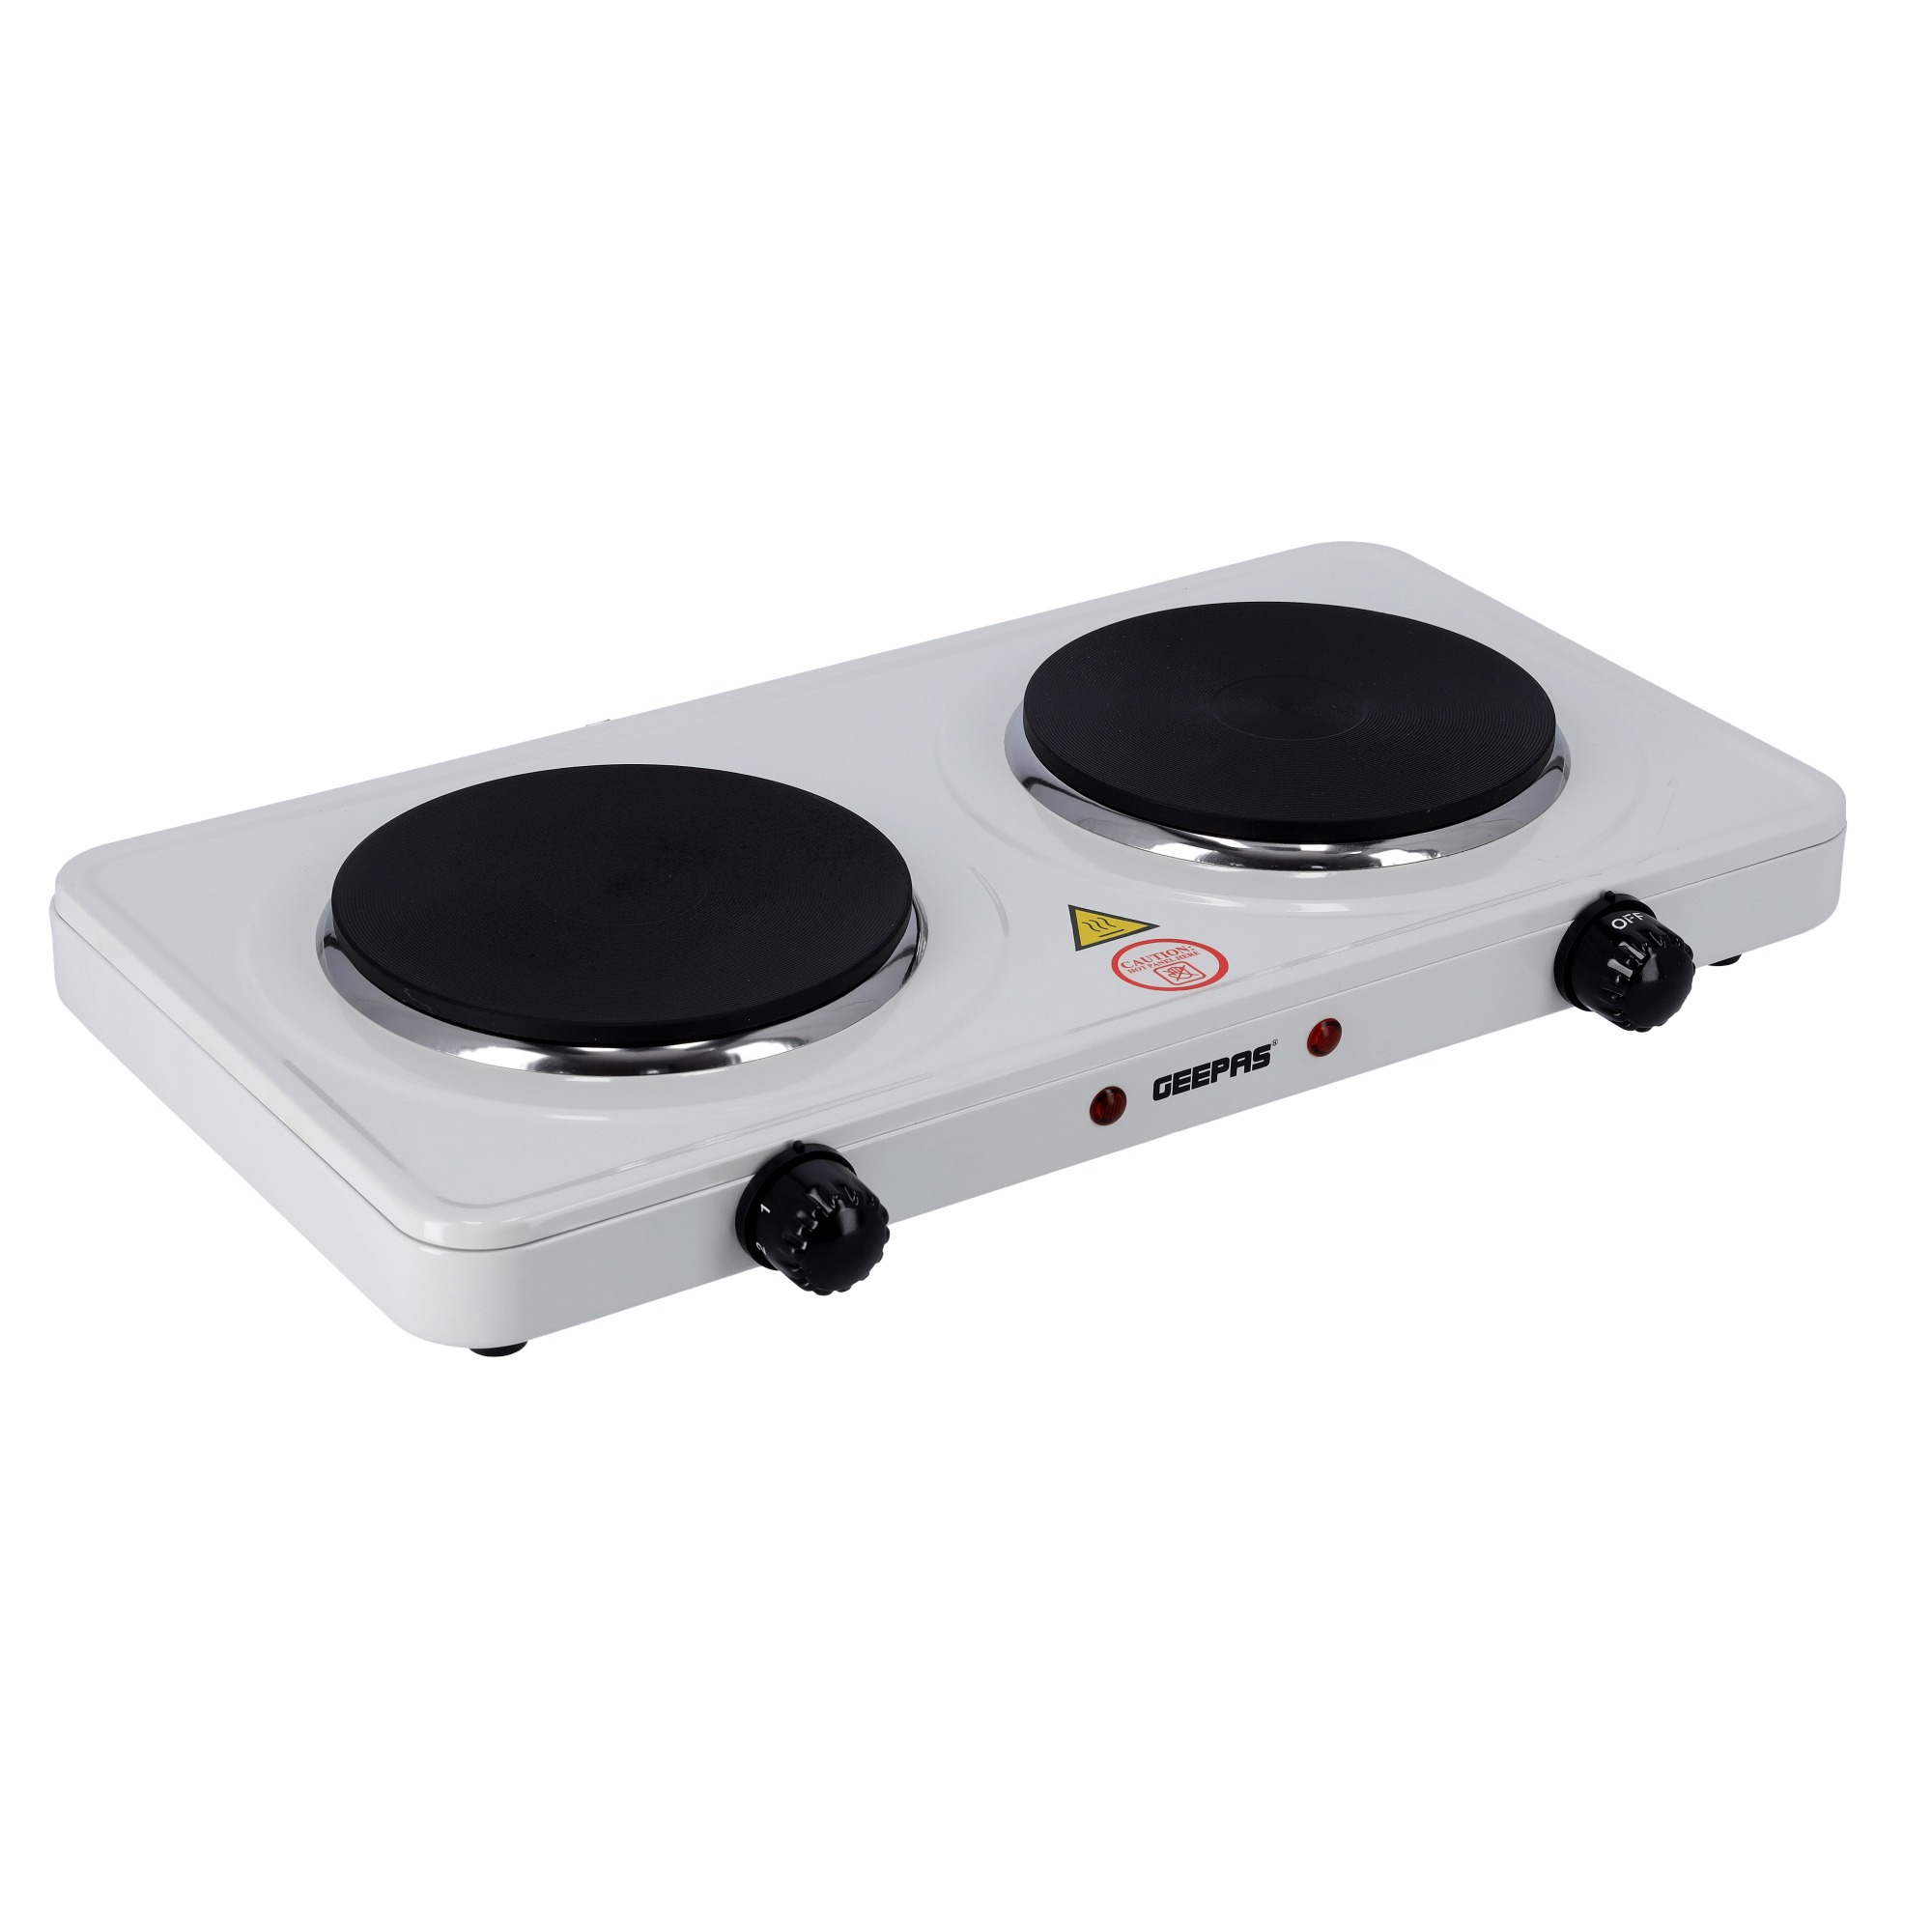 Hot Plate Use